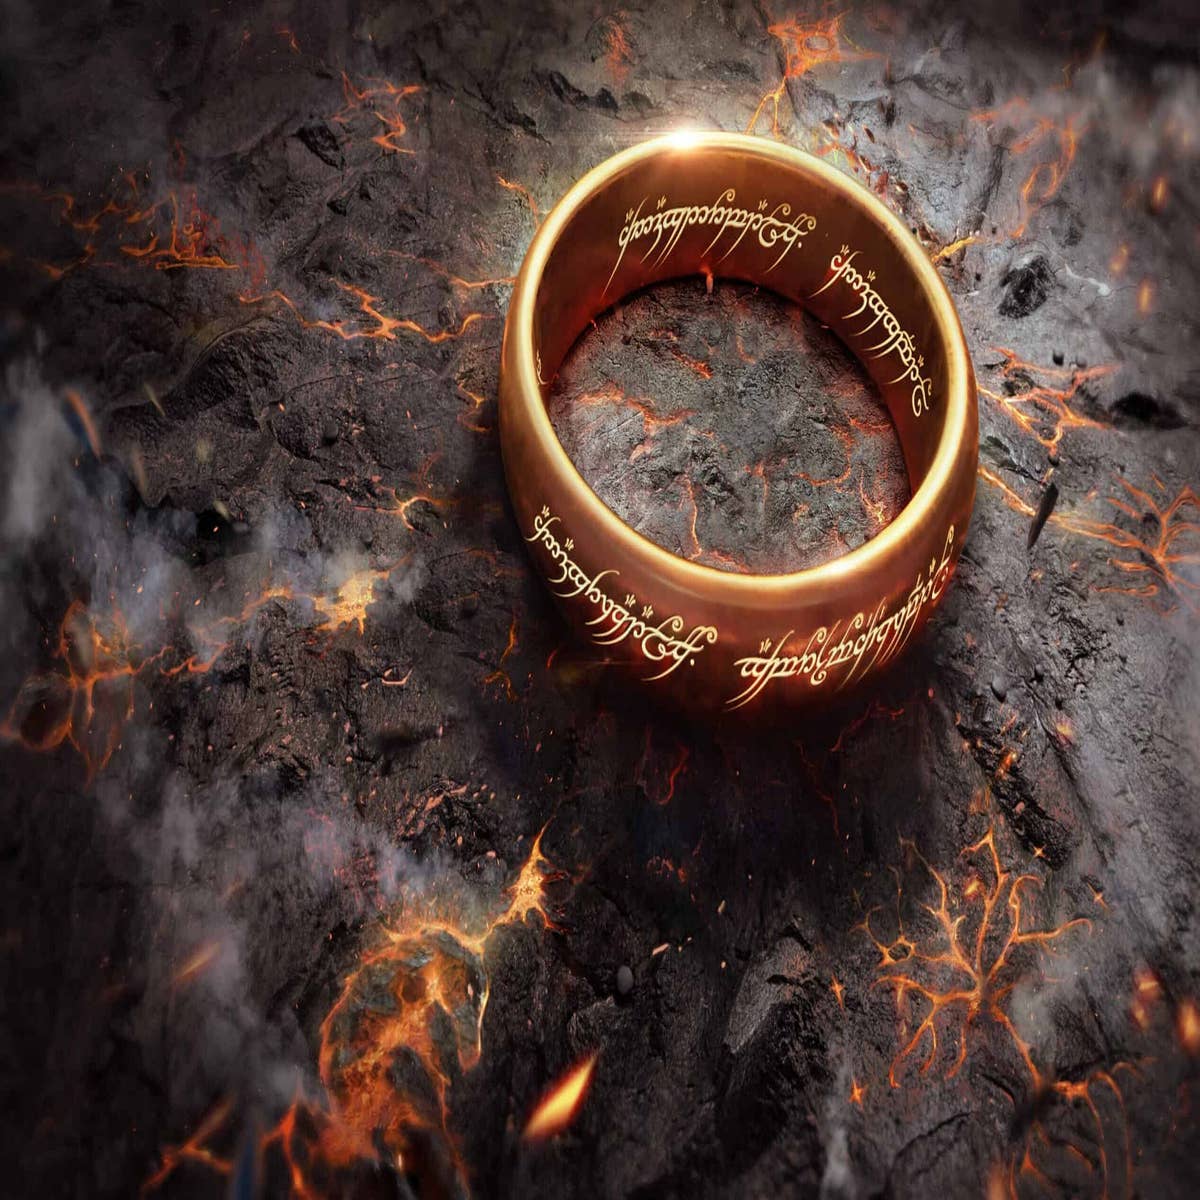 announces Lord of the Rings TV series.